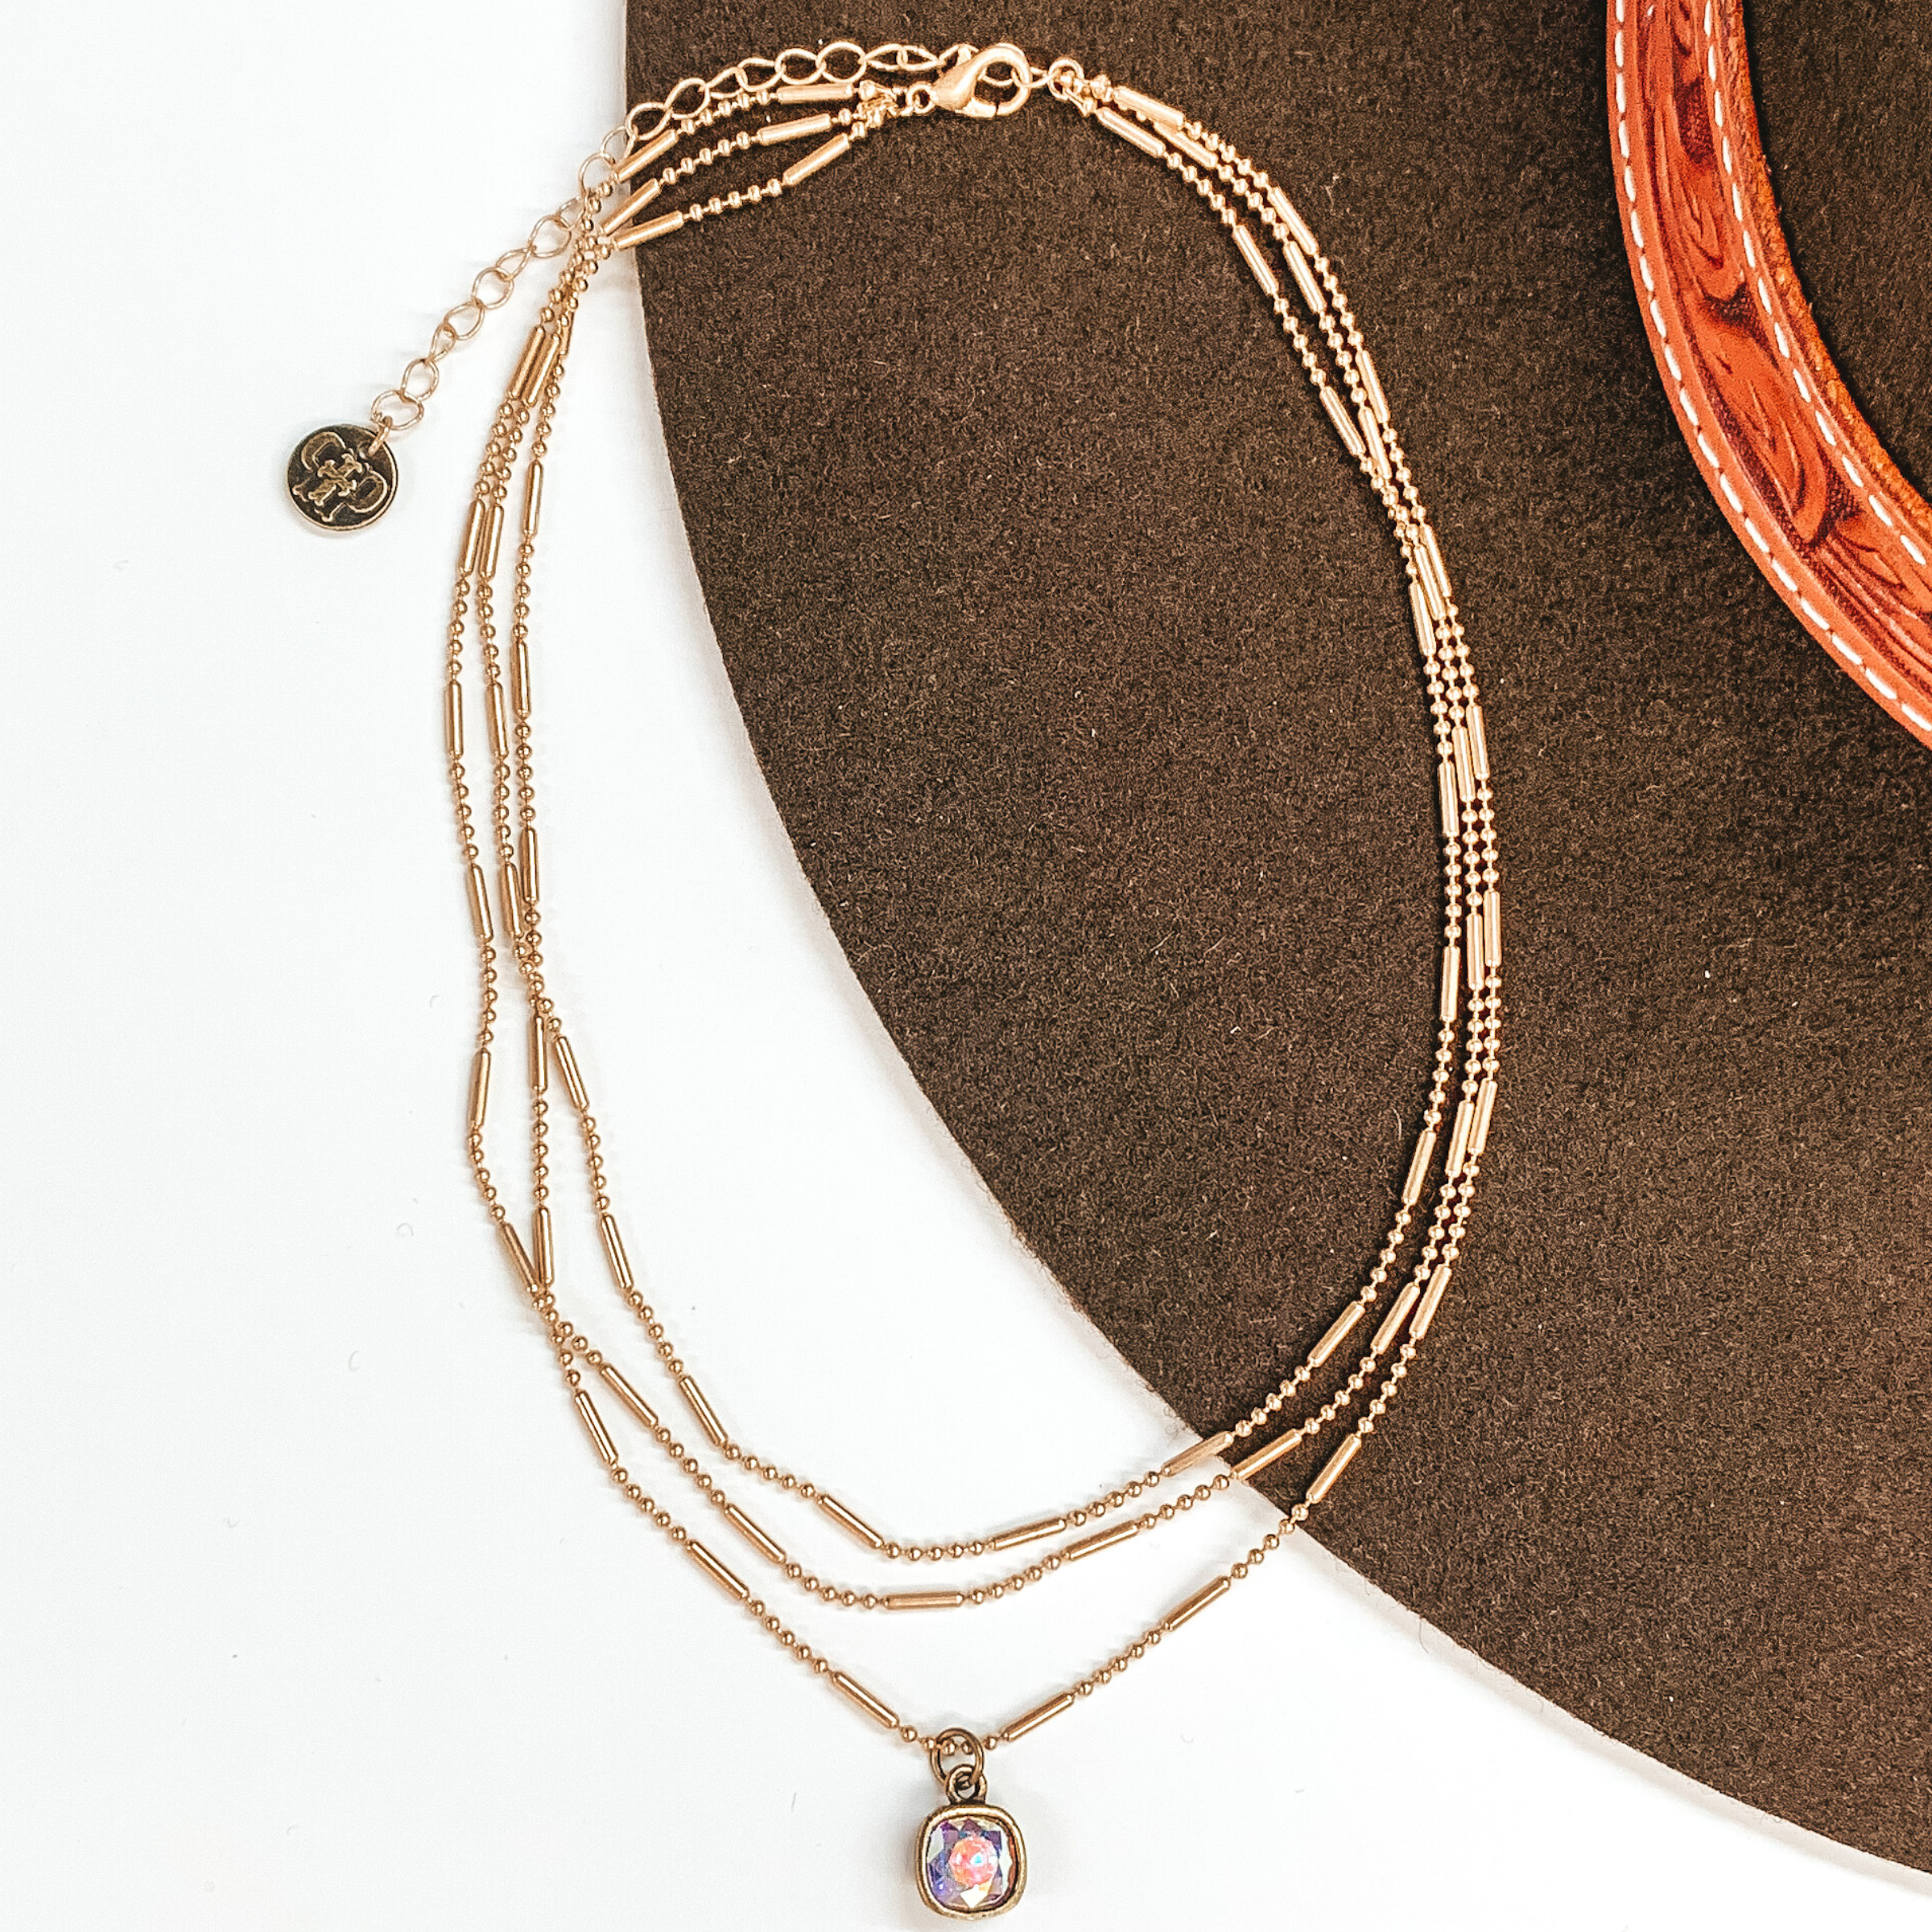 Pink Panache | Three Strand Gold Dot and Bar Chain Necklace with AB Cushion Cut Crystal Drop